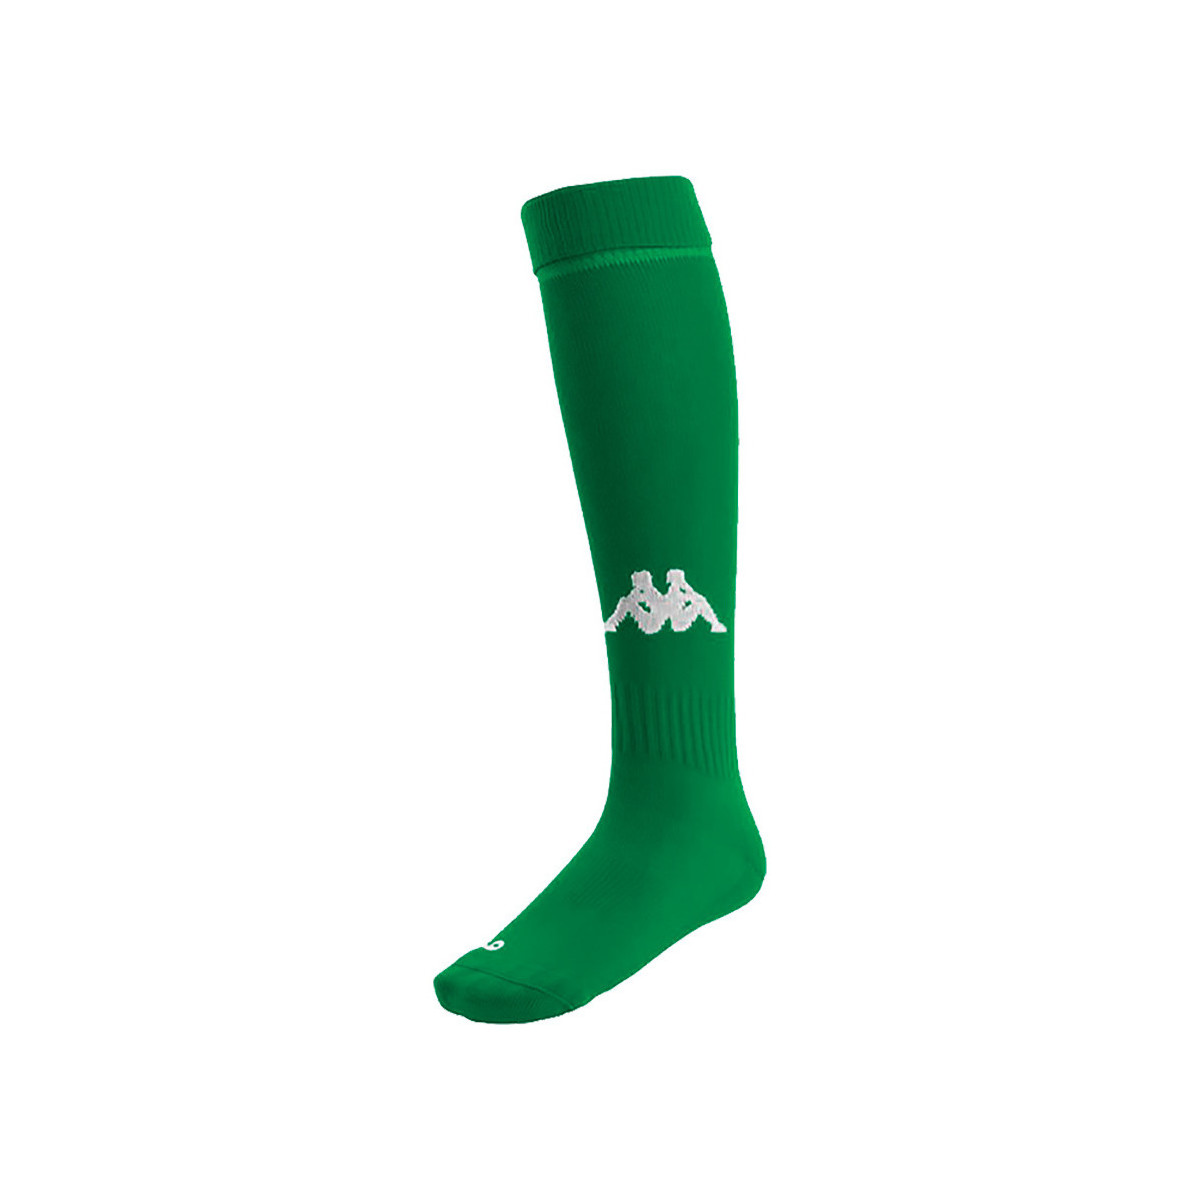 Kappa Vert Chaussettes Penao (3 paires) ooyXY3Rh